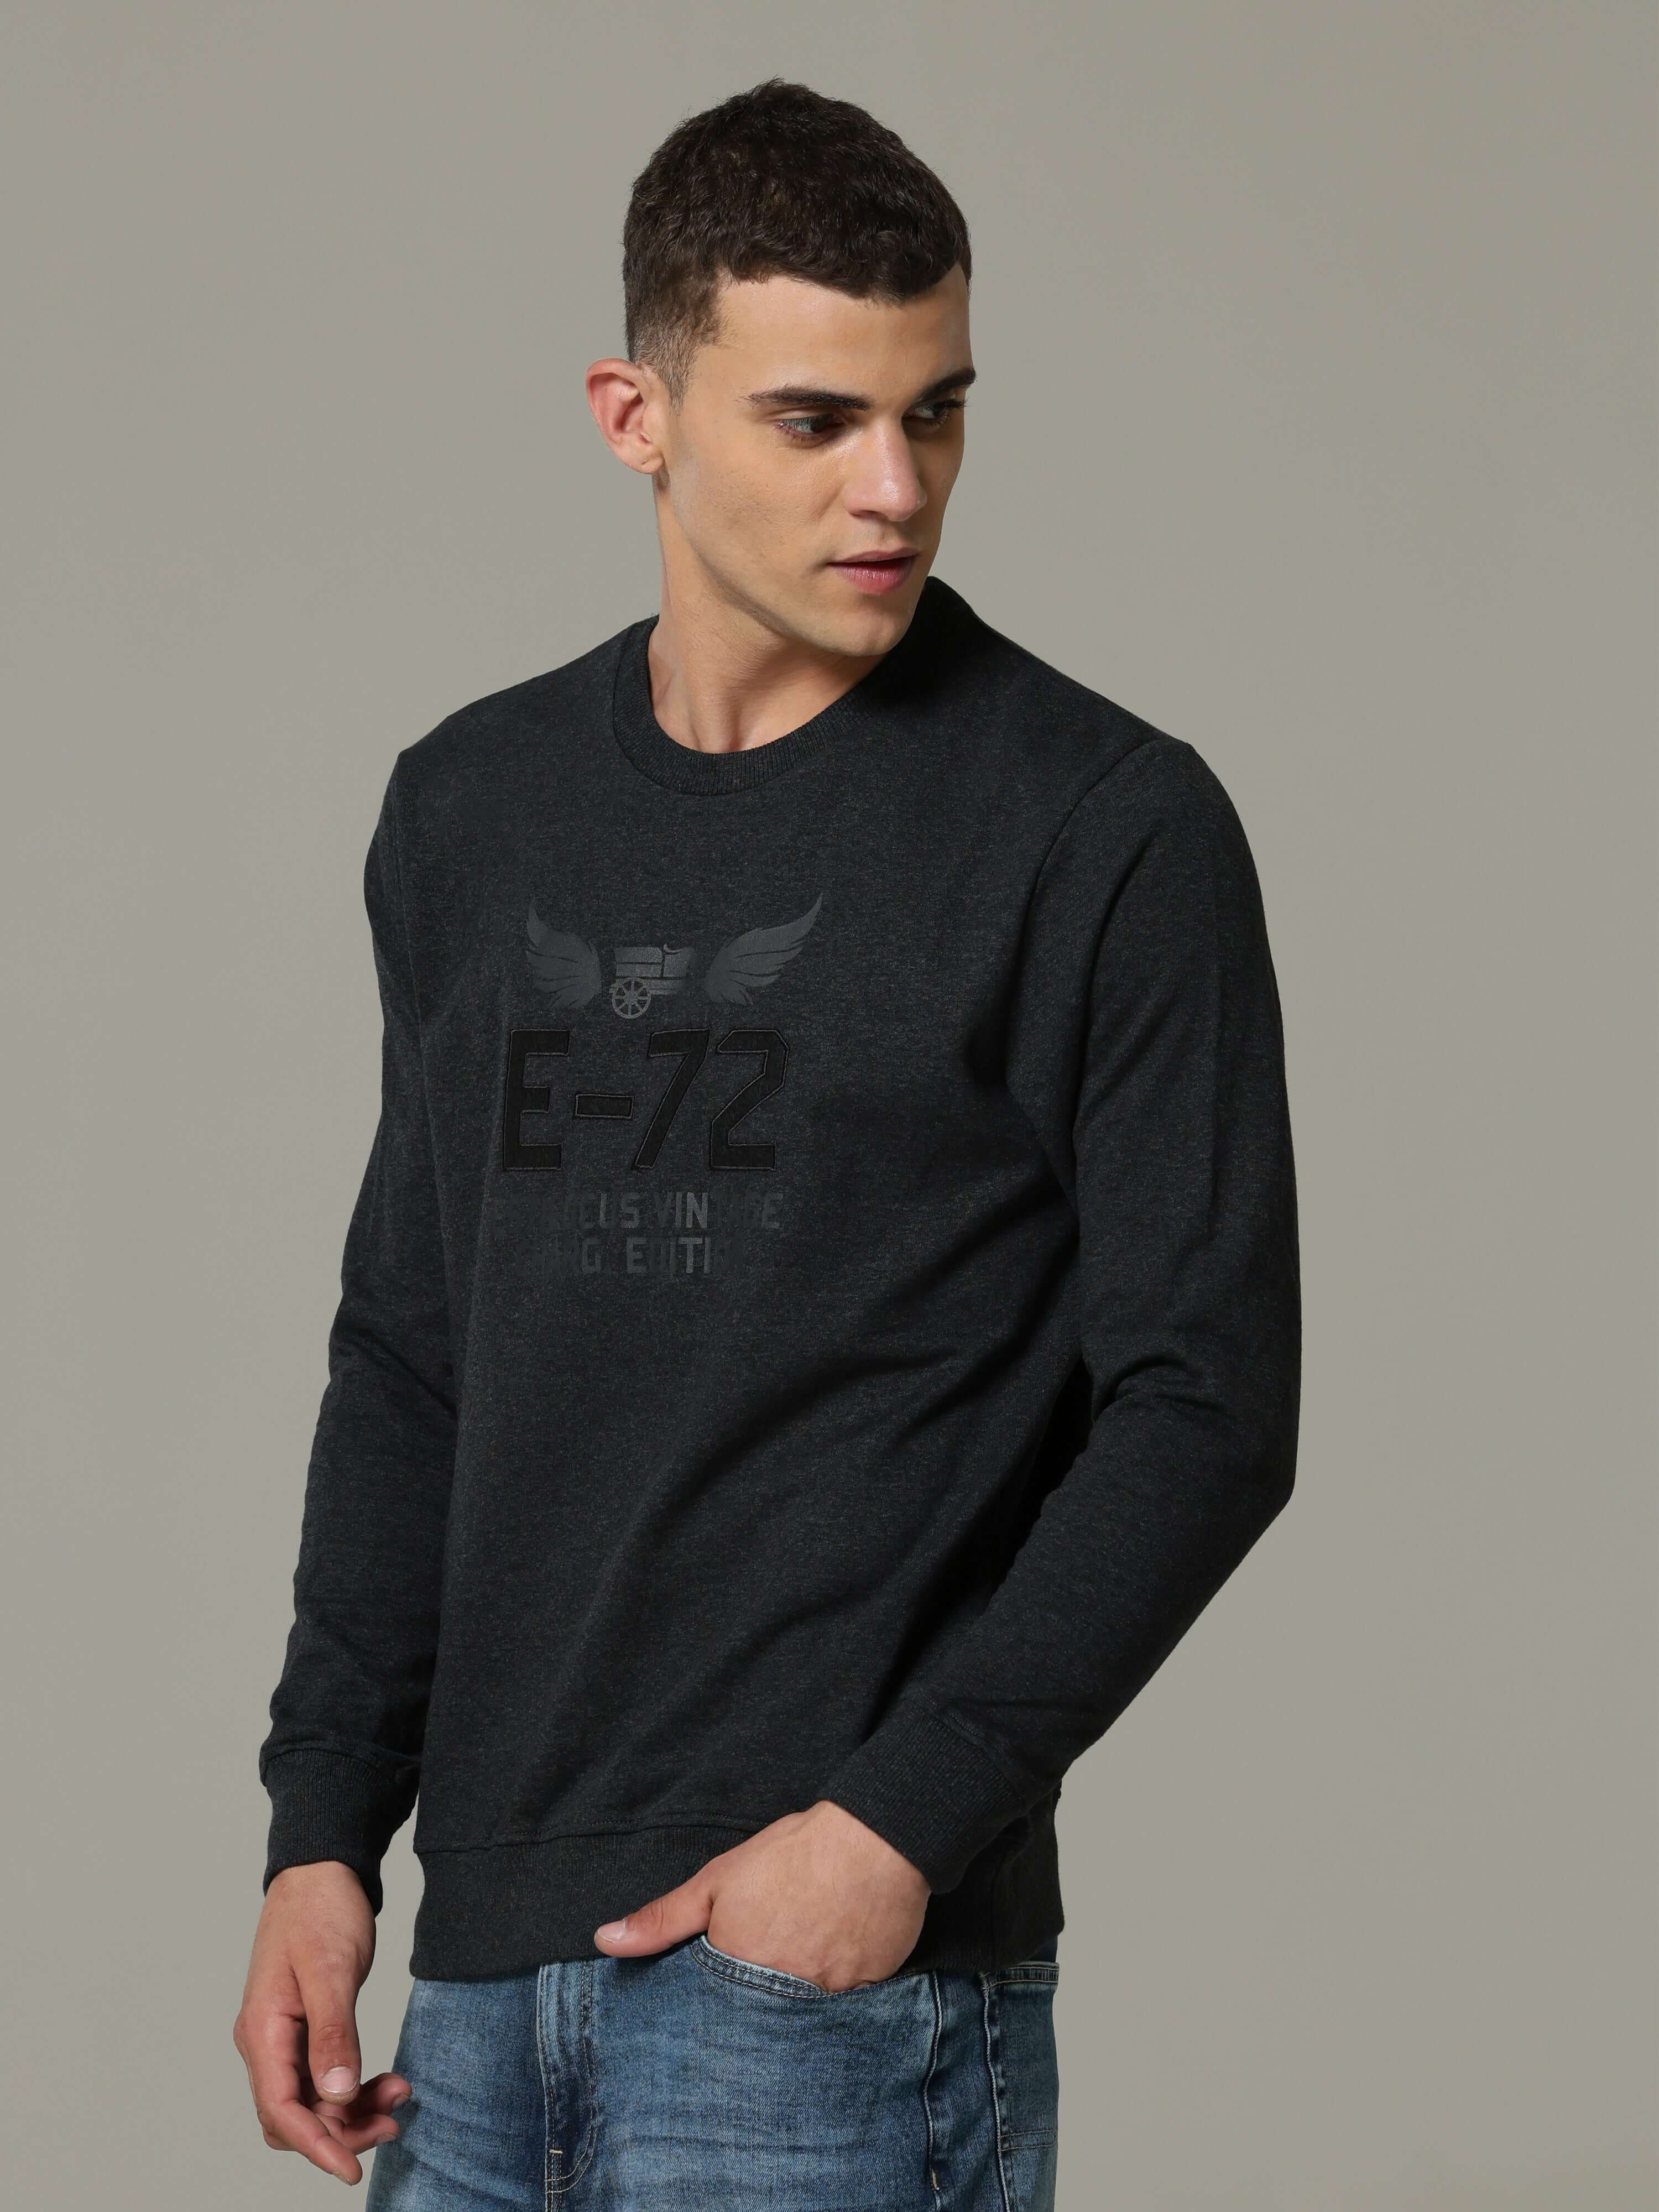 Vintage Edition Charcoal Grey Sweat Shirt shop online at Estilocus. • Crew neck • Long sleeve • Ribbing around neckline, Cuff & hem • High quality print and fine embroidery Fit : Comfort fit Size : The model is wearing M size Model height : 6 Feet Wash ca